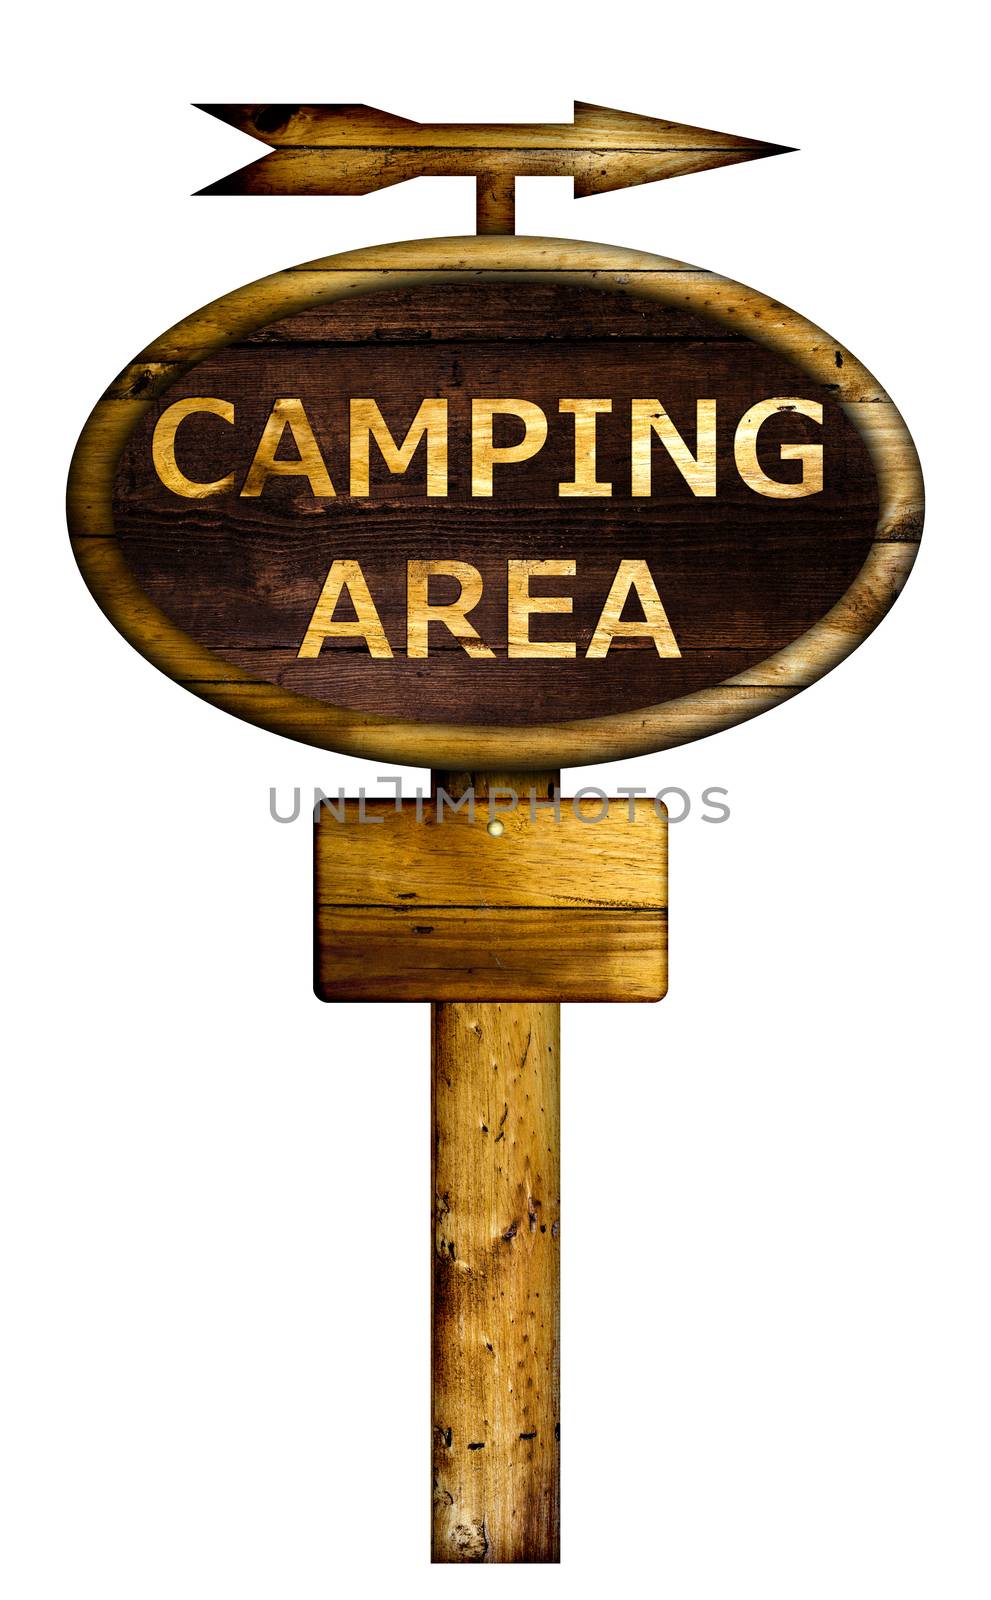 Old wooden camping area sign over a white background.